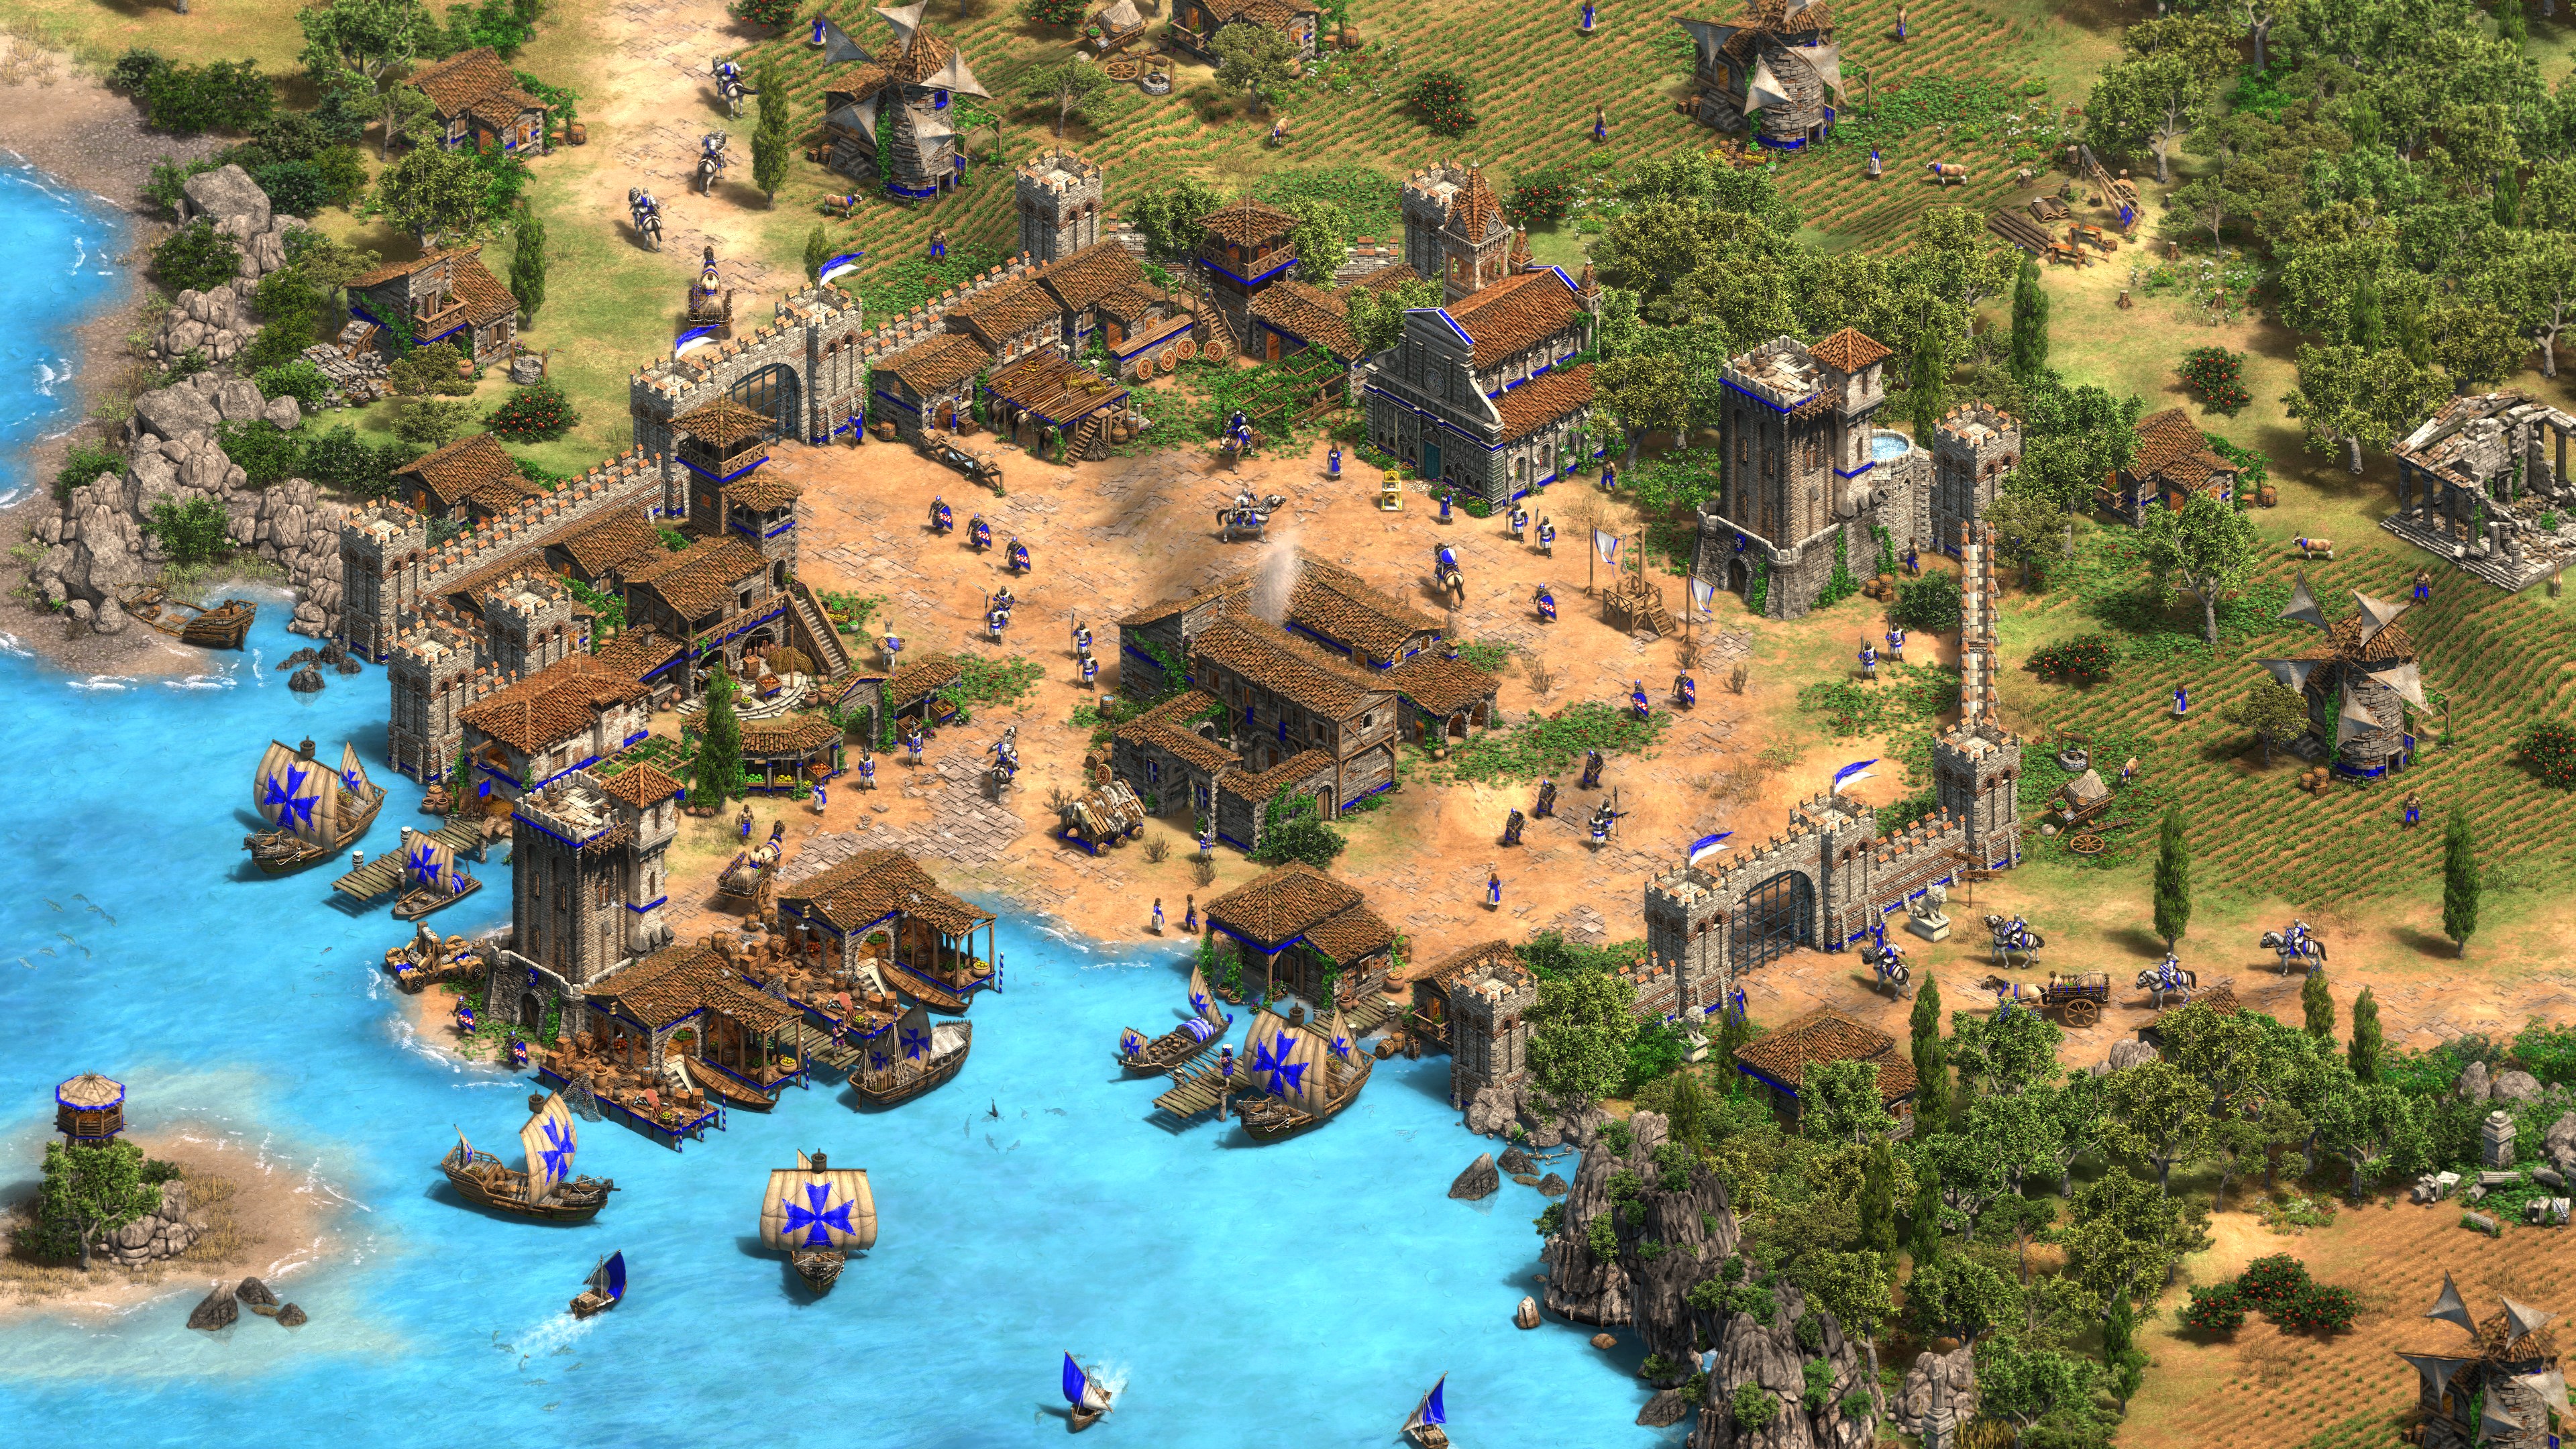 Age of Empires II: Definitive Edition - Lords of the West screenshot 45676